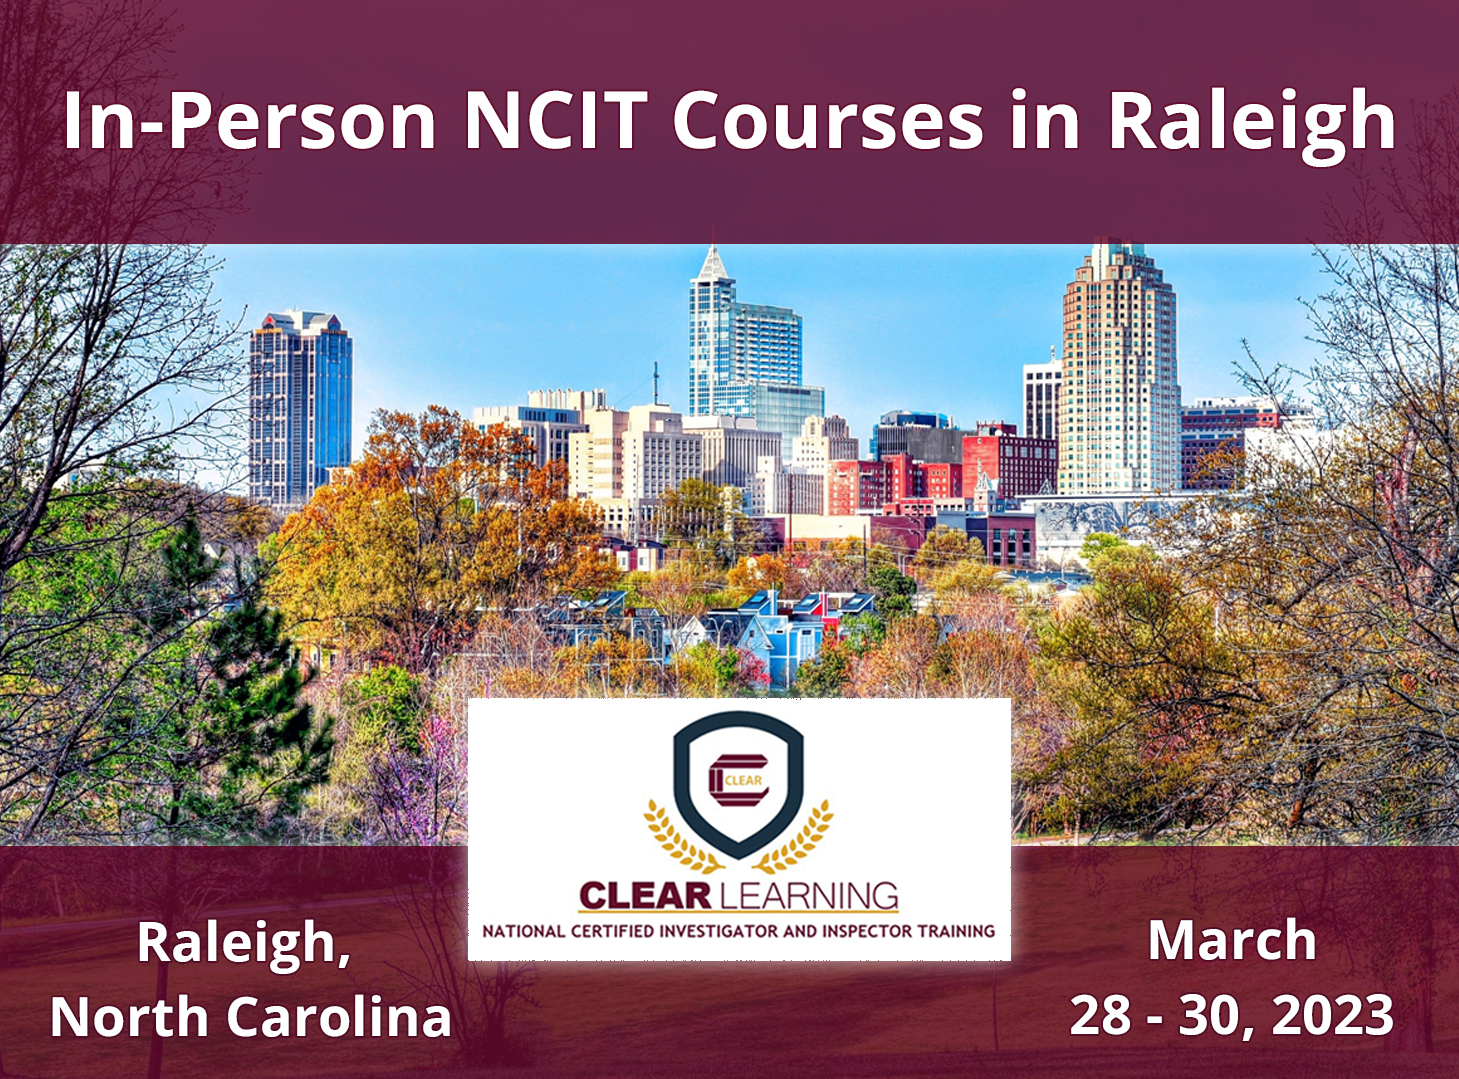 In-Person NCIT Courses